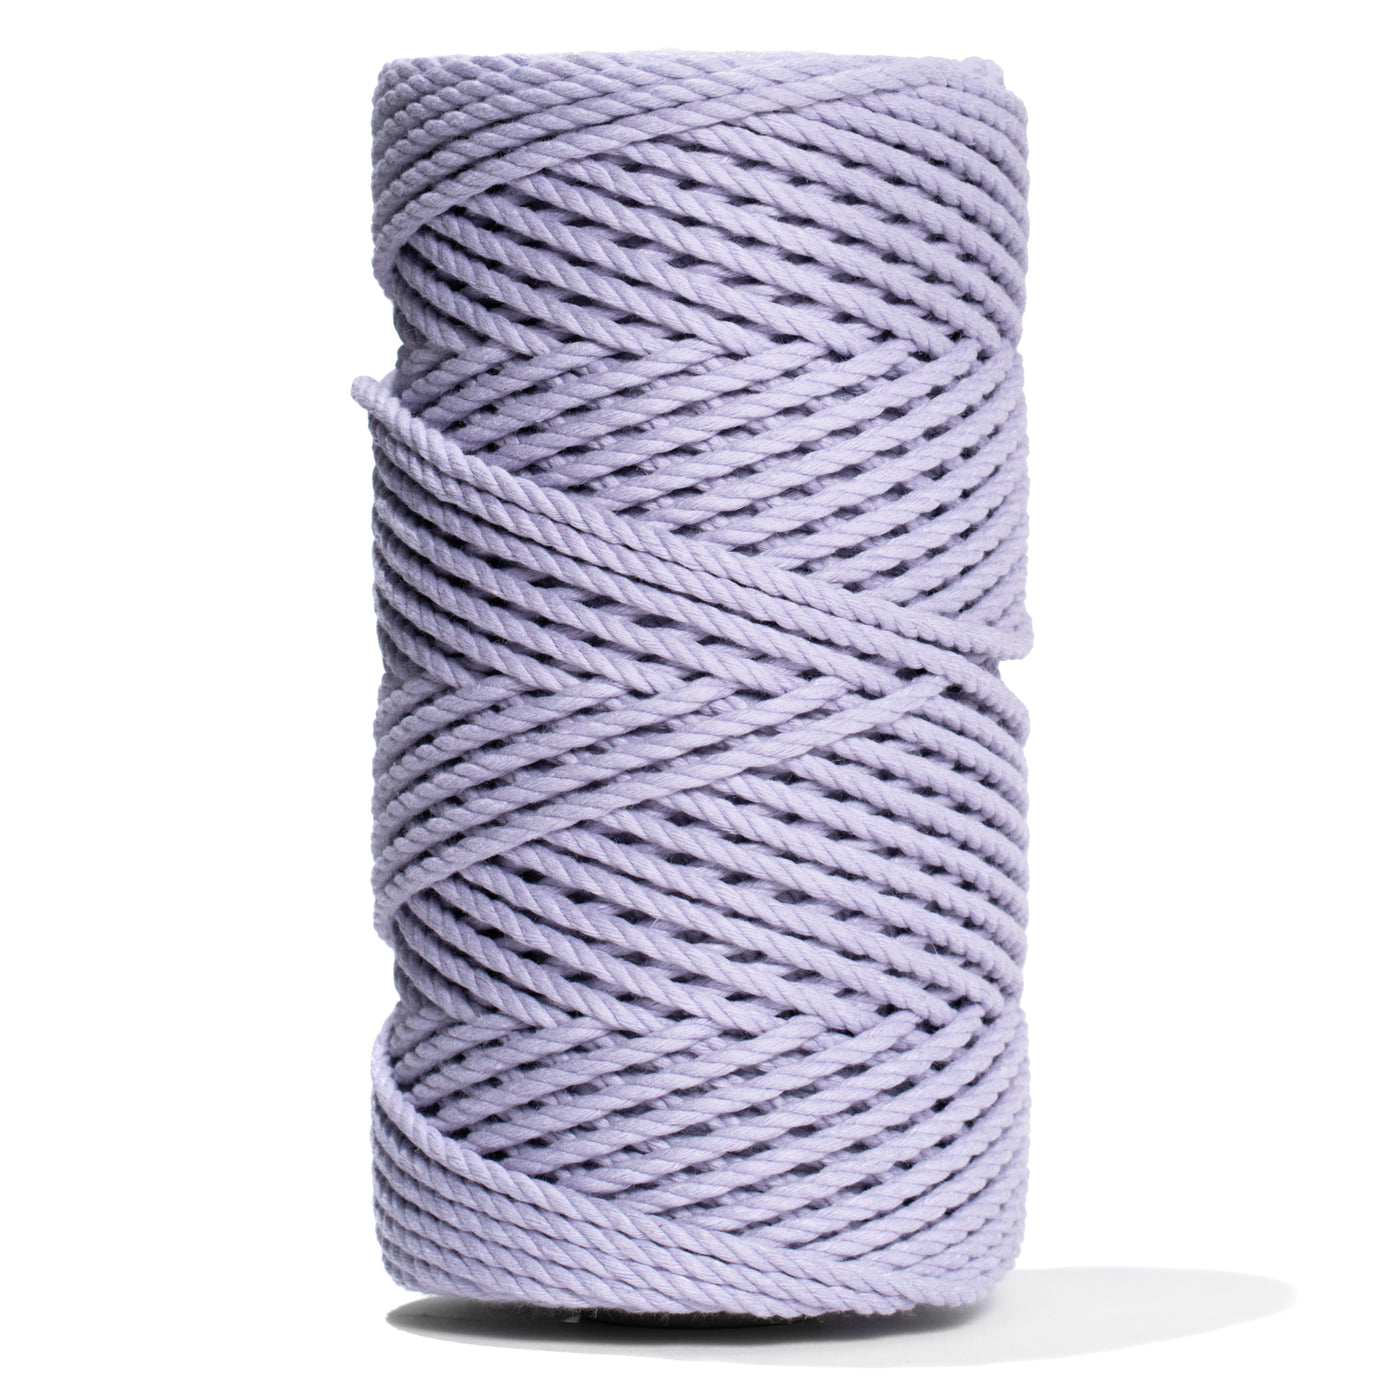 COTTON ROPE ZERO WASTE 3 MM - 3 PLY - LILAC COLOR